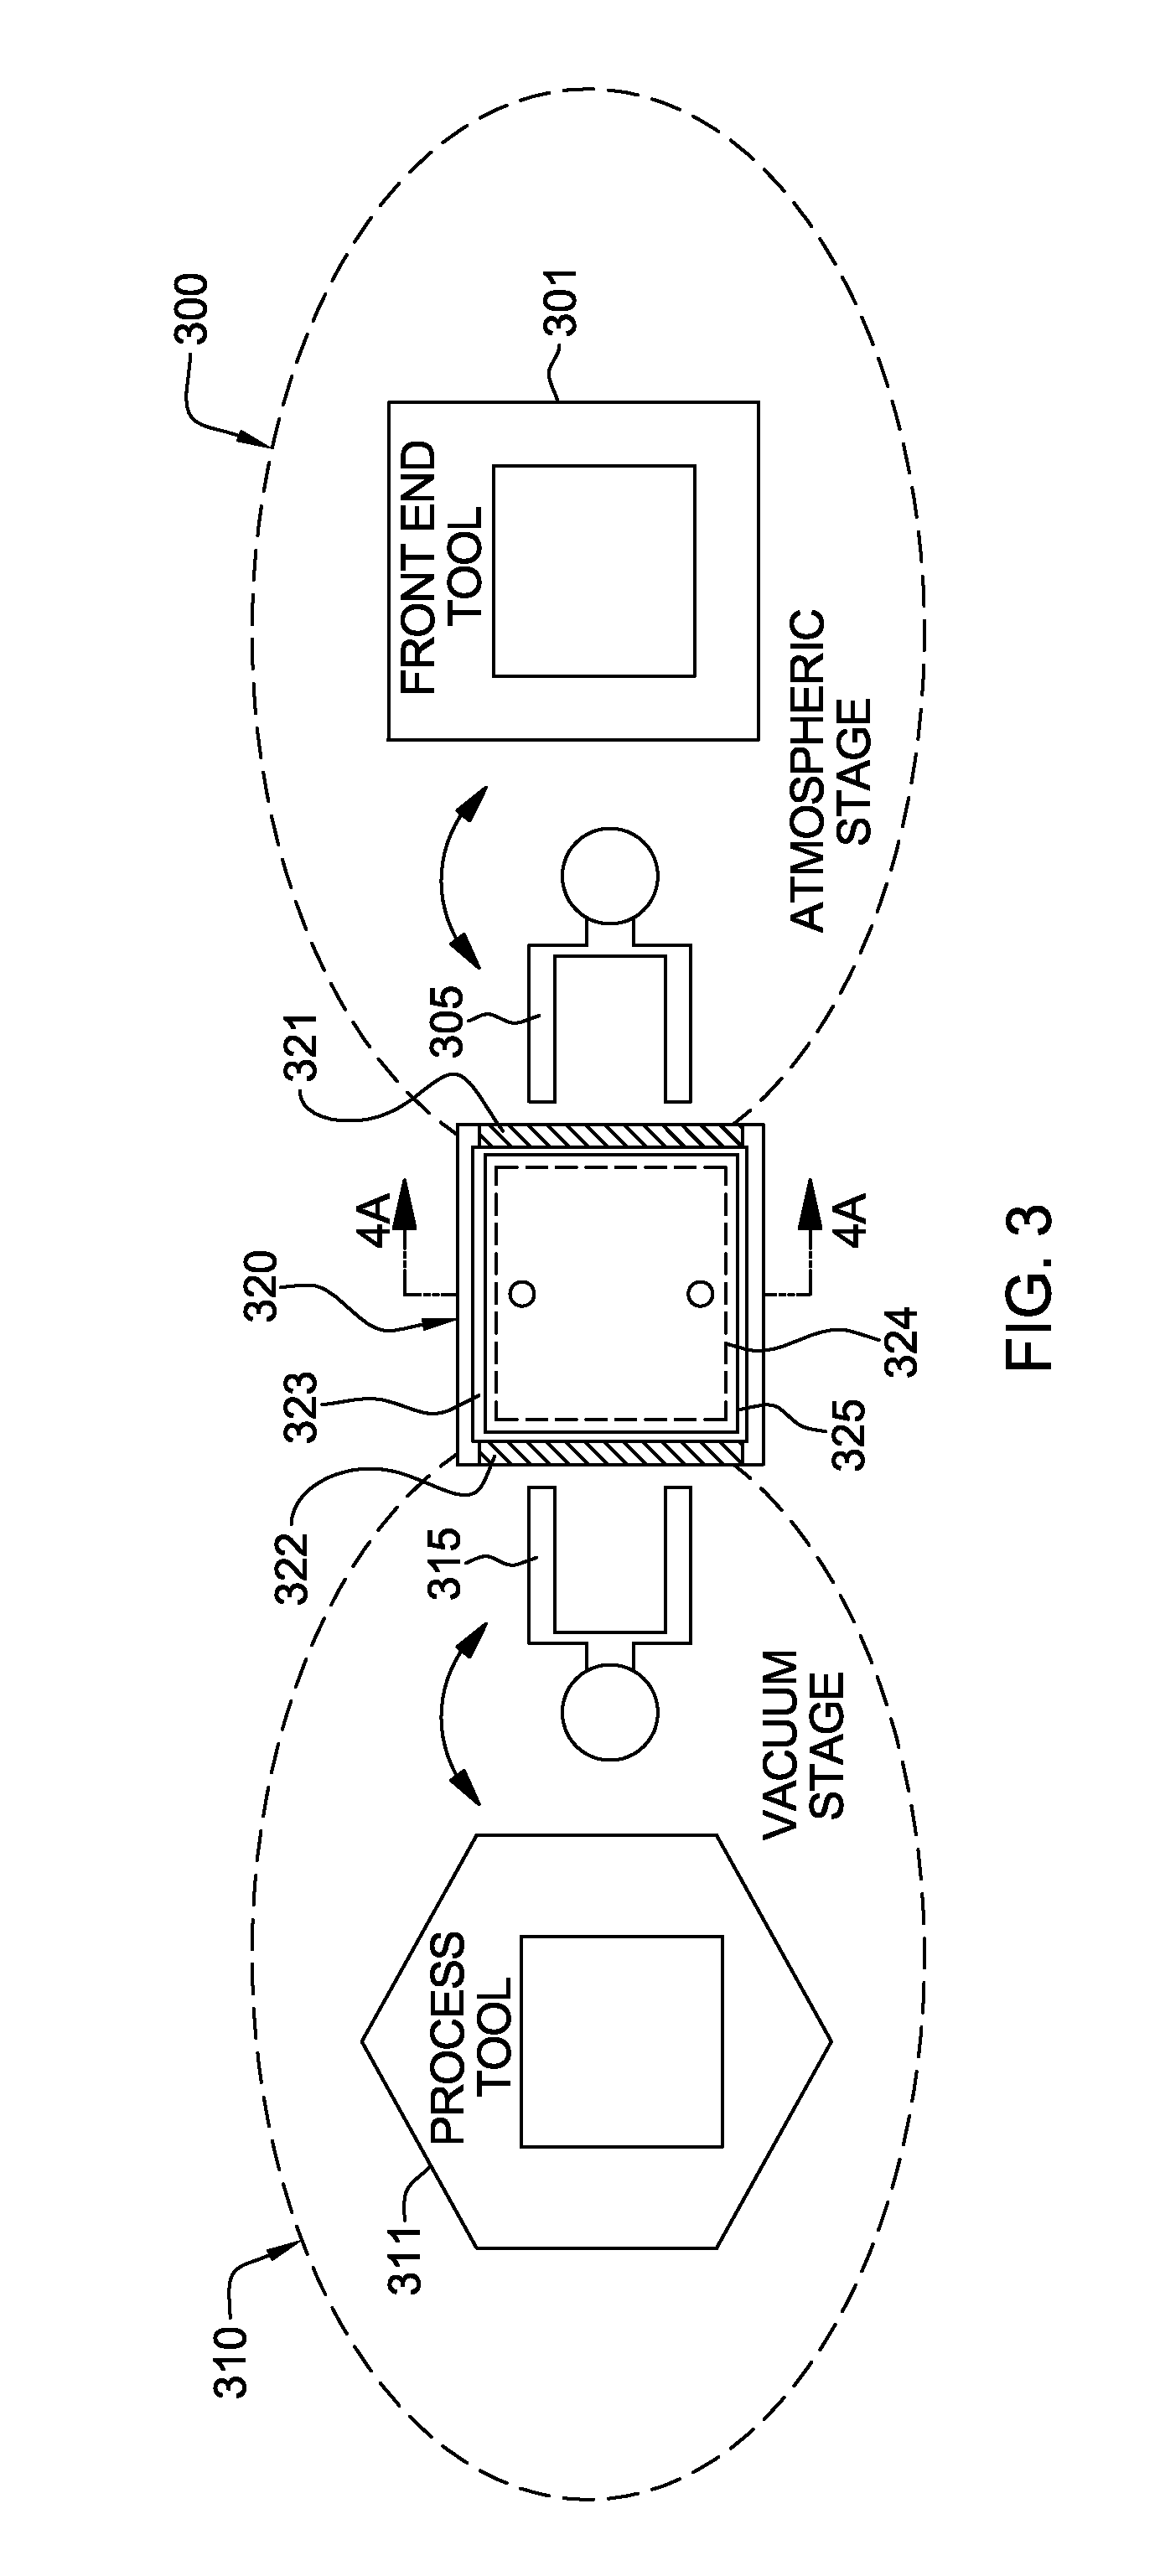 Apparatus with surface protector to inhibit contamination